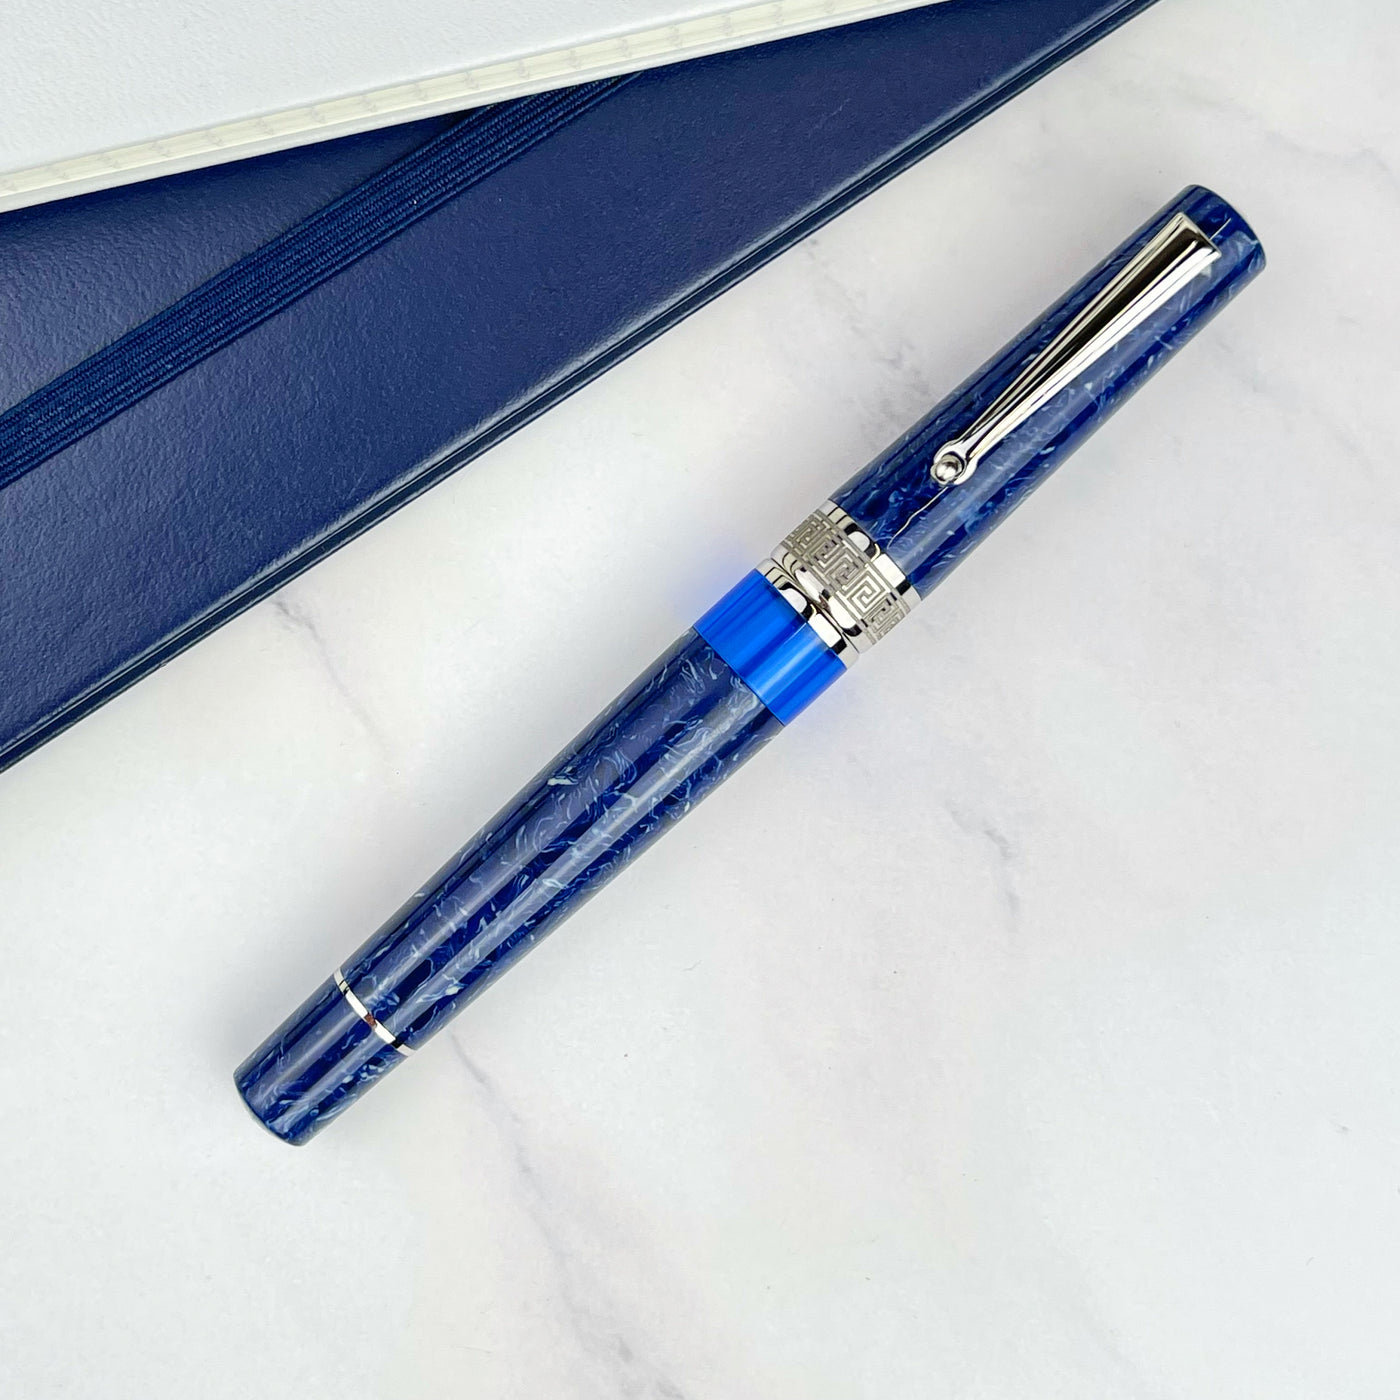 Delta Lapis Blue Celluloid Fountain Pen with Silver Trim (Limited Edition)